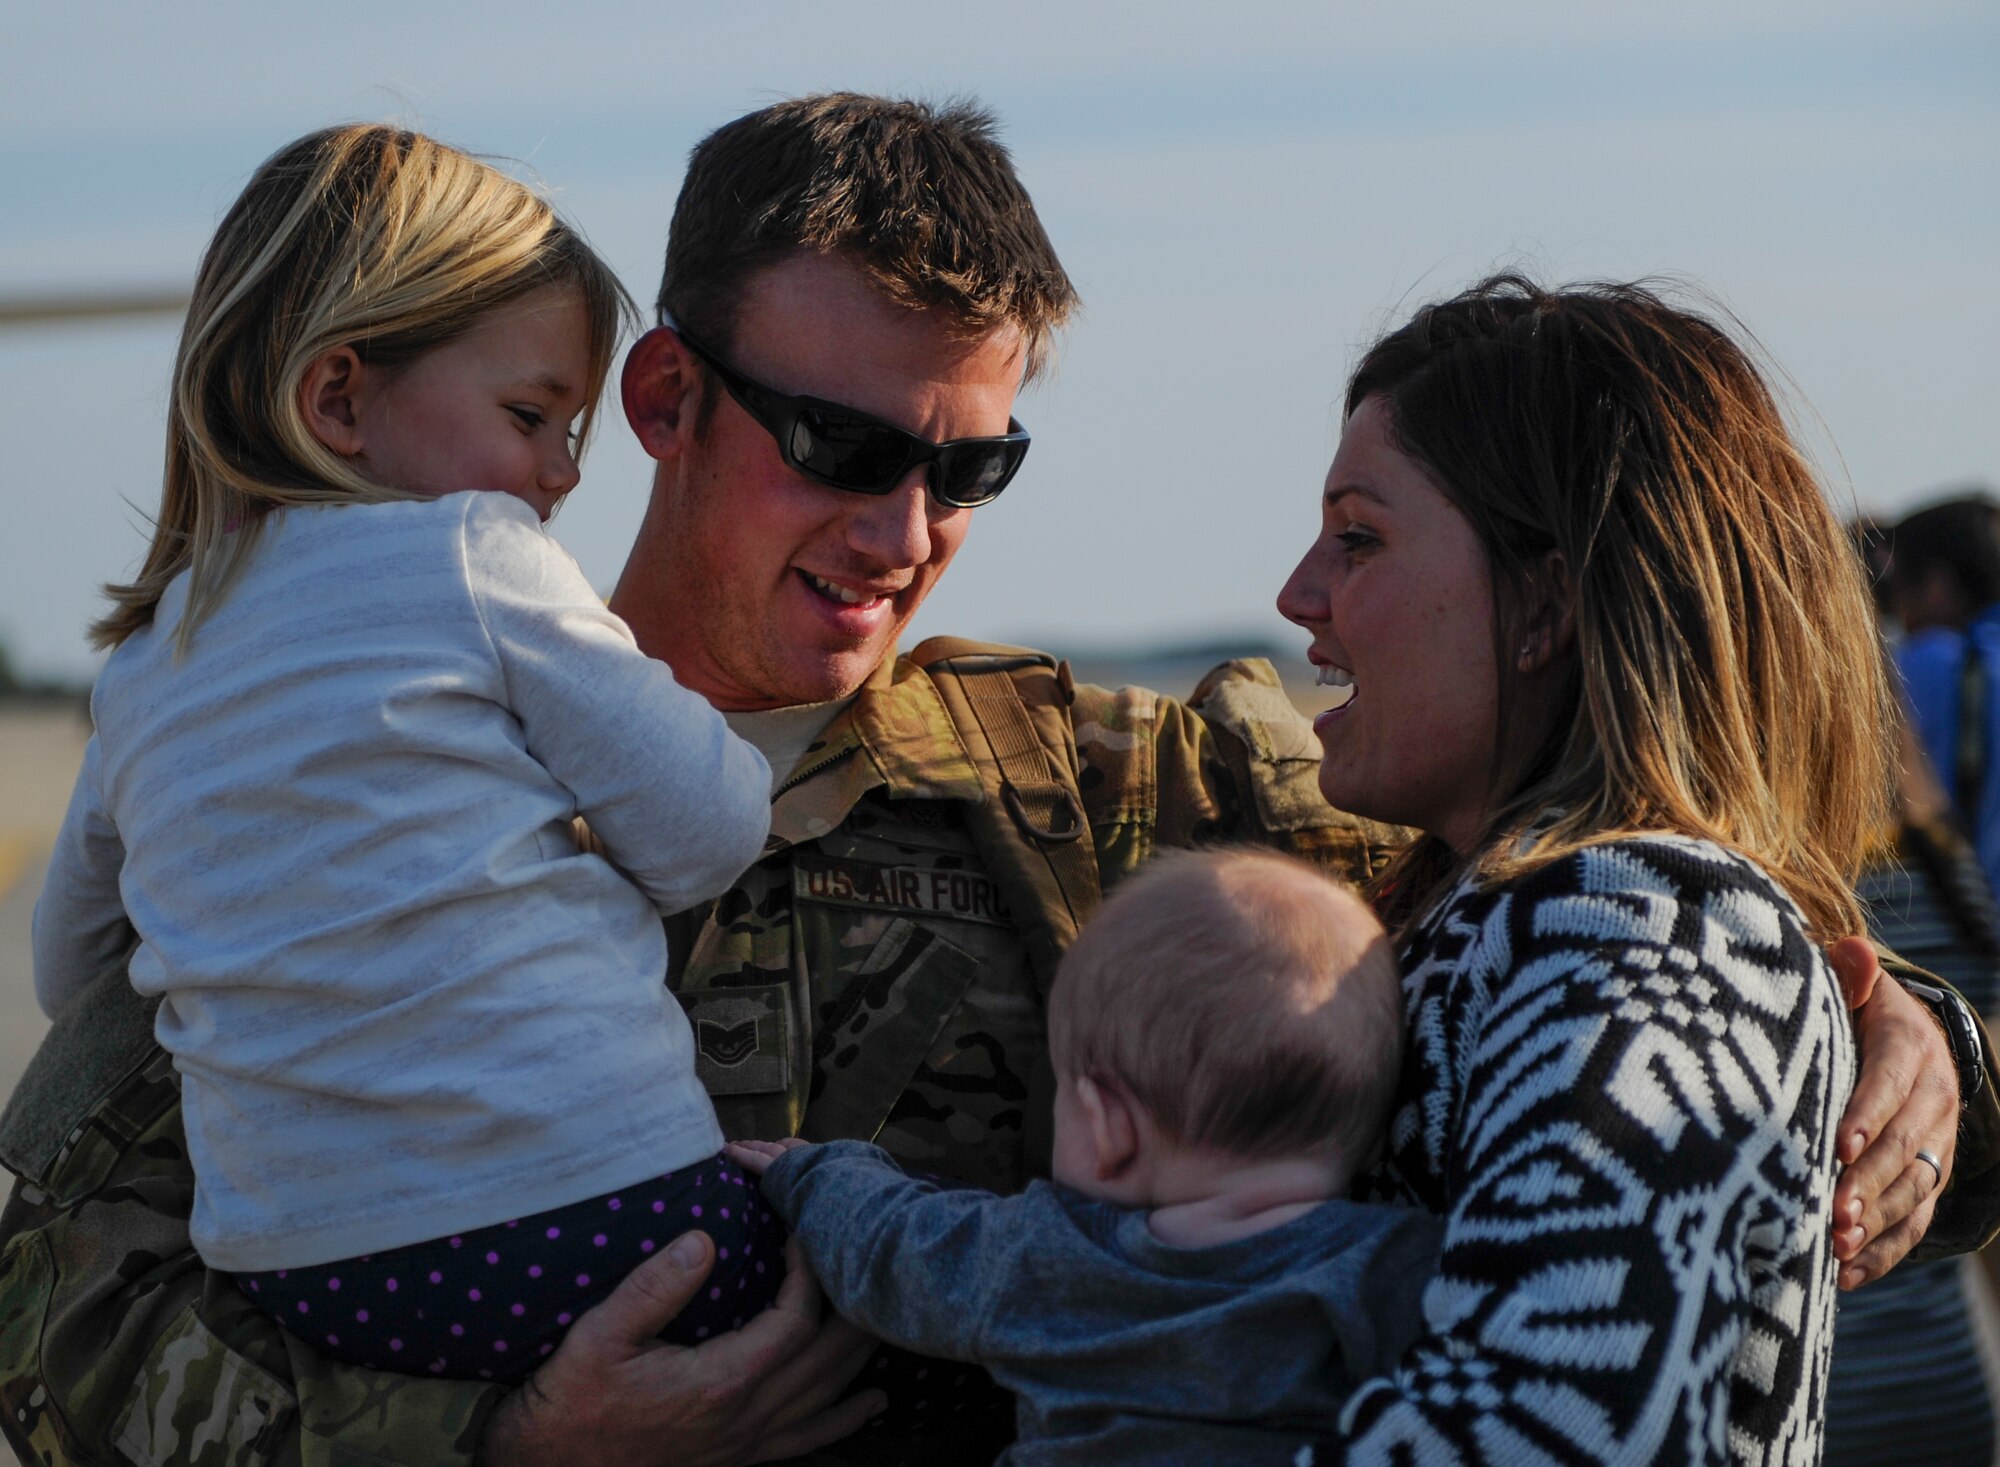 Tech. Sgt. Jeff Hieber, 4thSpecial Operations Squadron sensor operator, hugs his family during Operation Homecoming Dec. 11, 2014, after returning to Hurlburt Field, Fla. from a deployment. Operation Homecoming welcomed home more than 40 Air Commandos. (U.S. Air Force photo/Senior Airman Christopher Callaway).